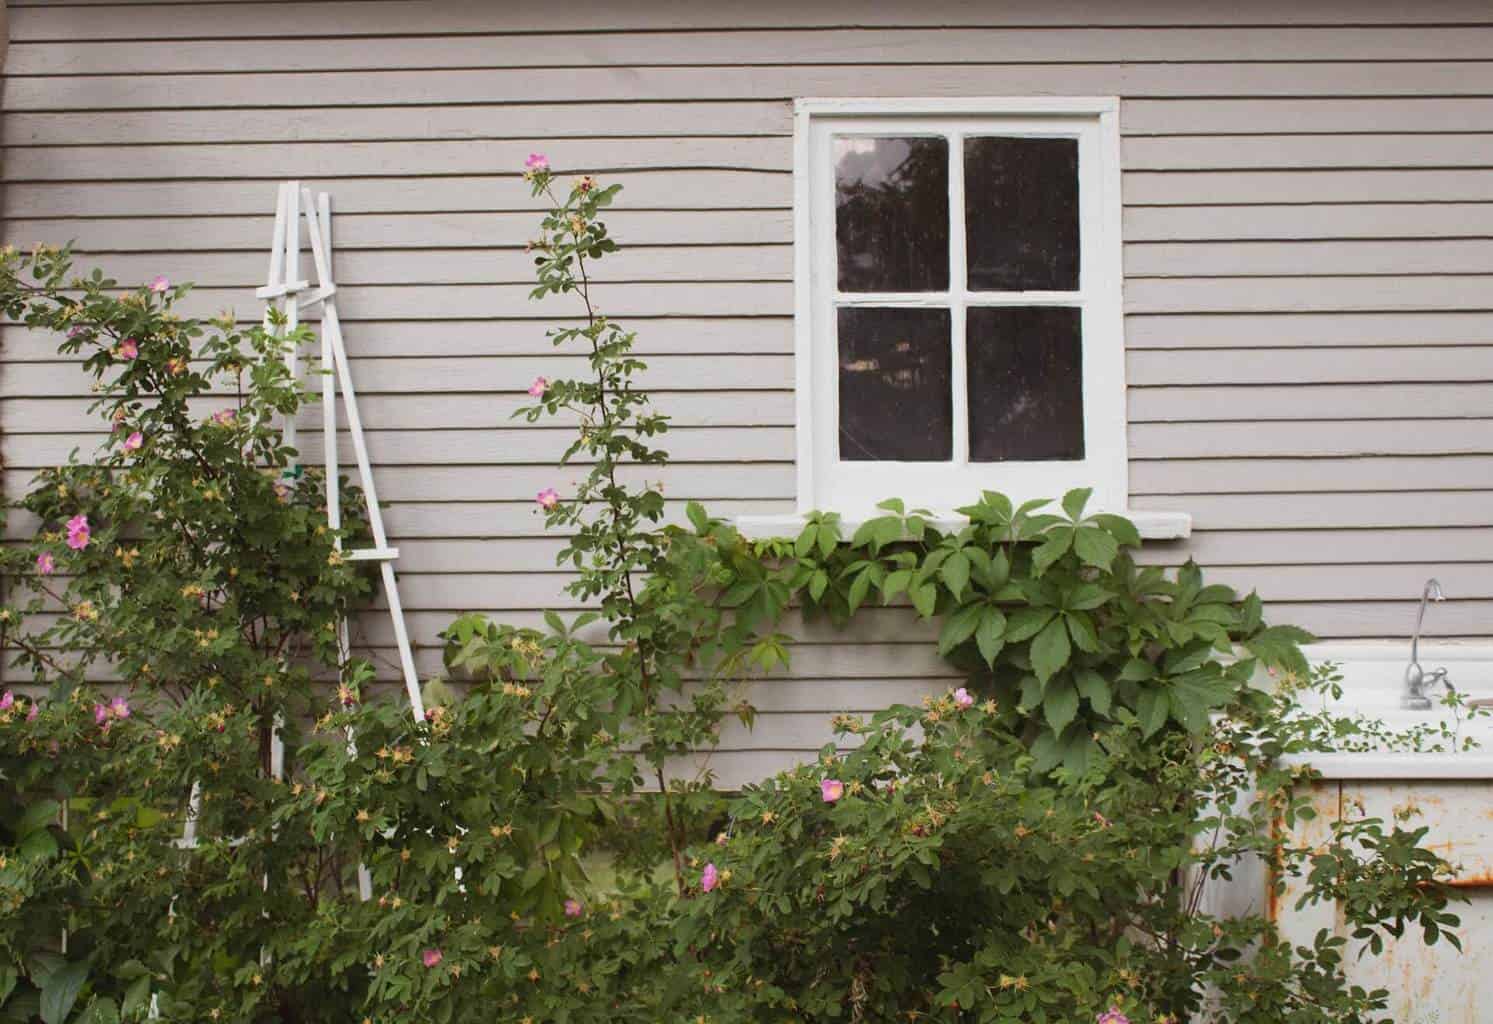 Roses climbing up a trellis leaned against a house with light gray siding. Plants are growing up the wall near a window.